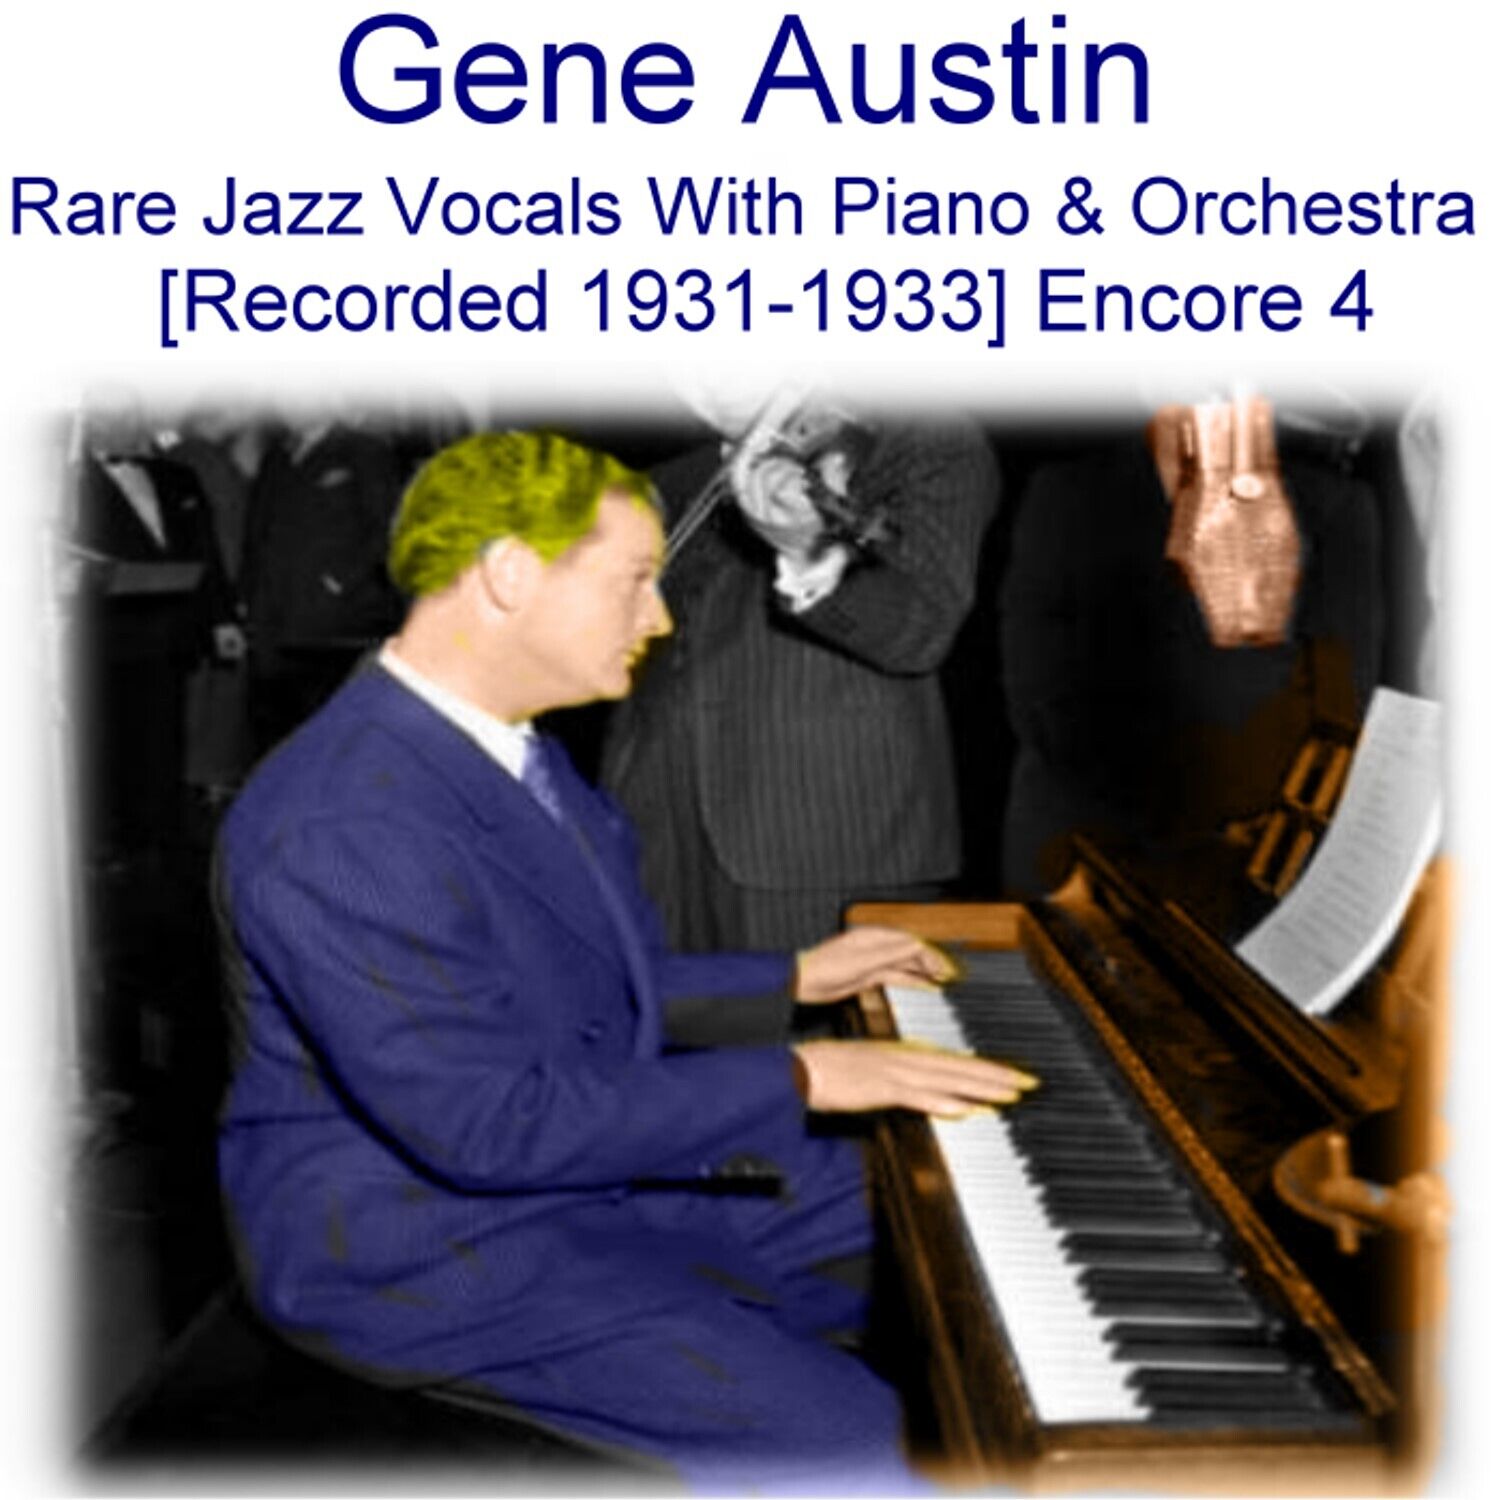 Gene Austin - Rare Jazz Vocals with Piano and Orchestra (1931-33) Enc 4  New CD 